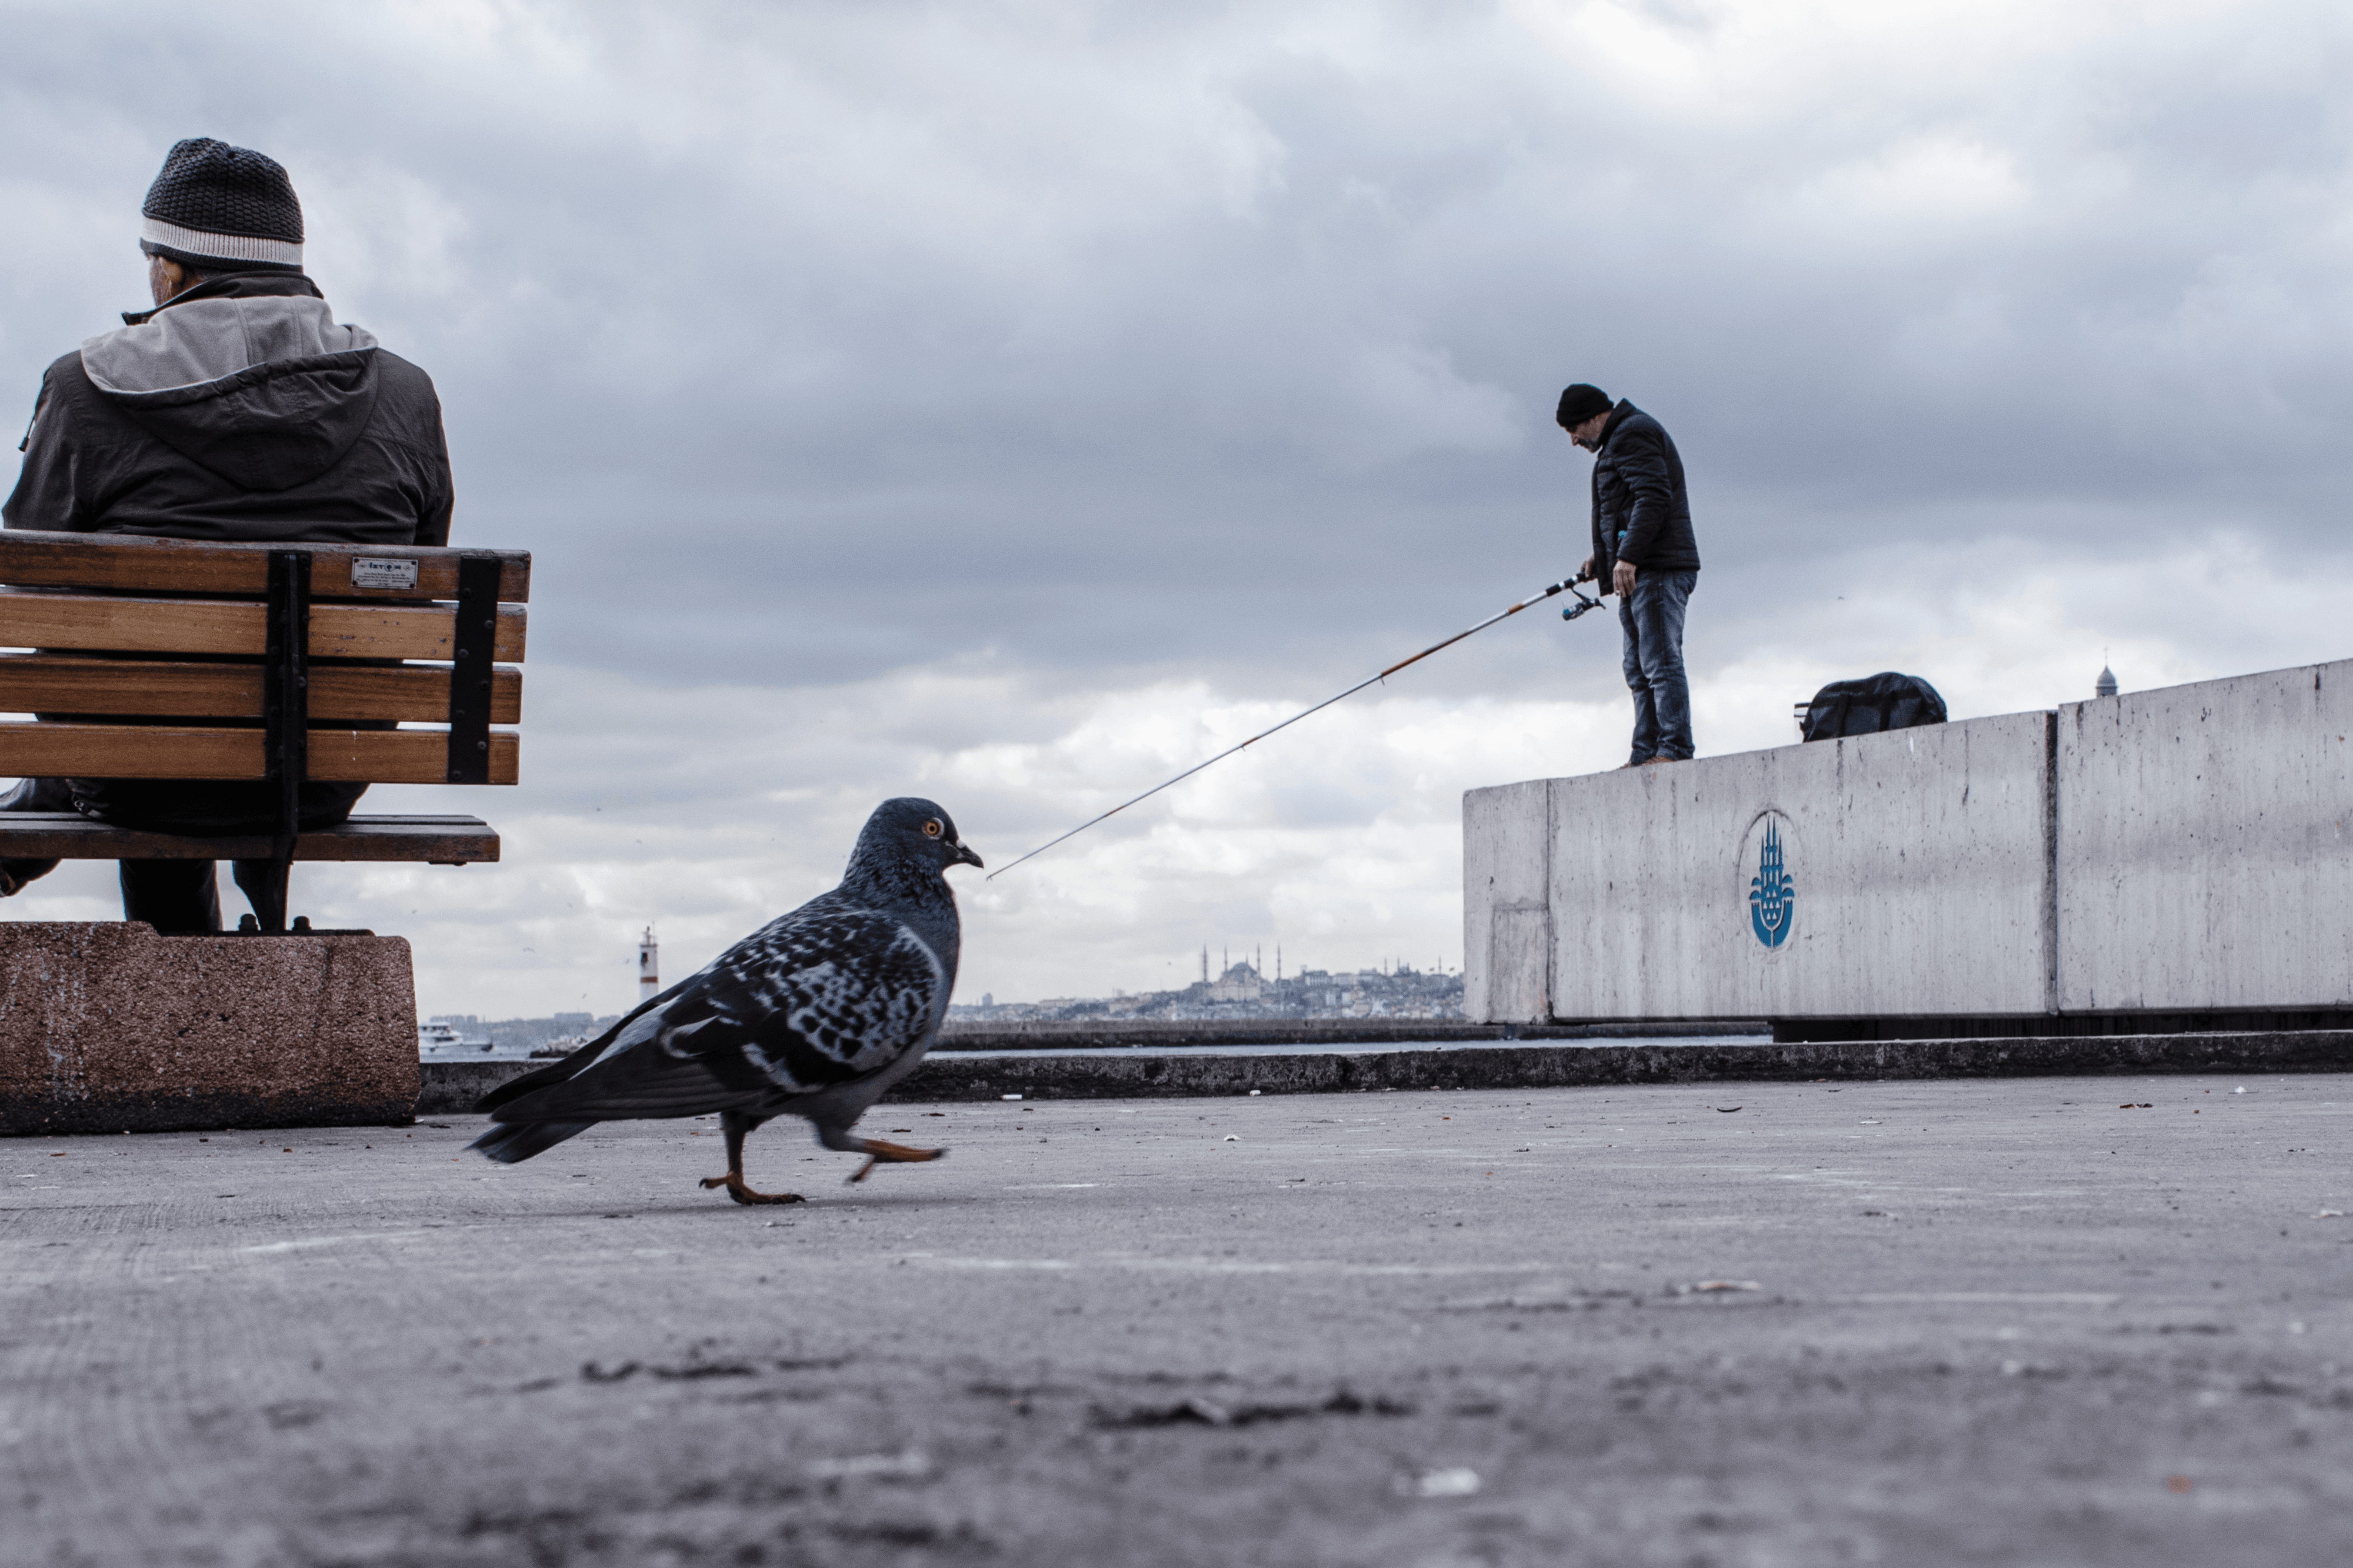 THE PIGEON TRAINER